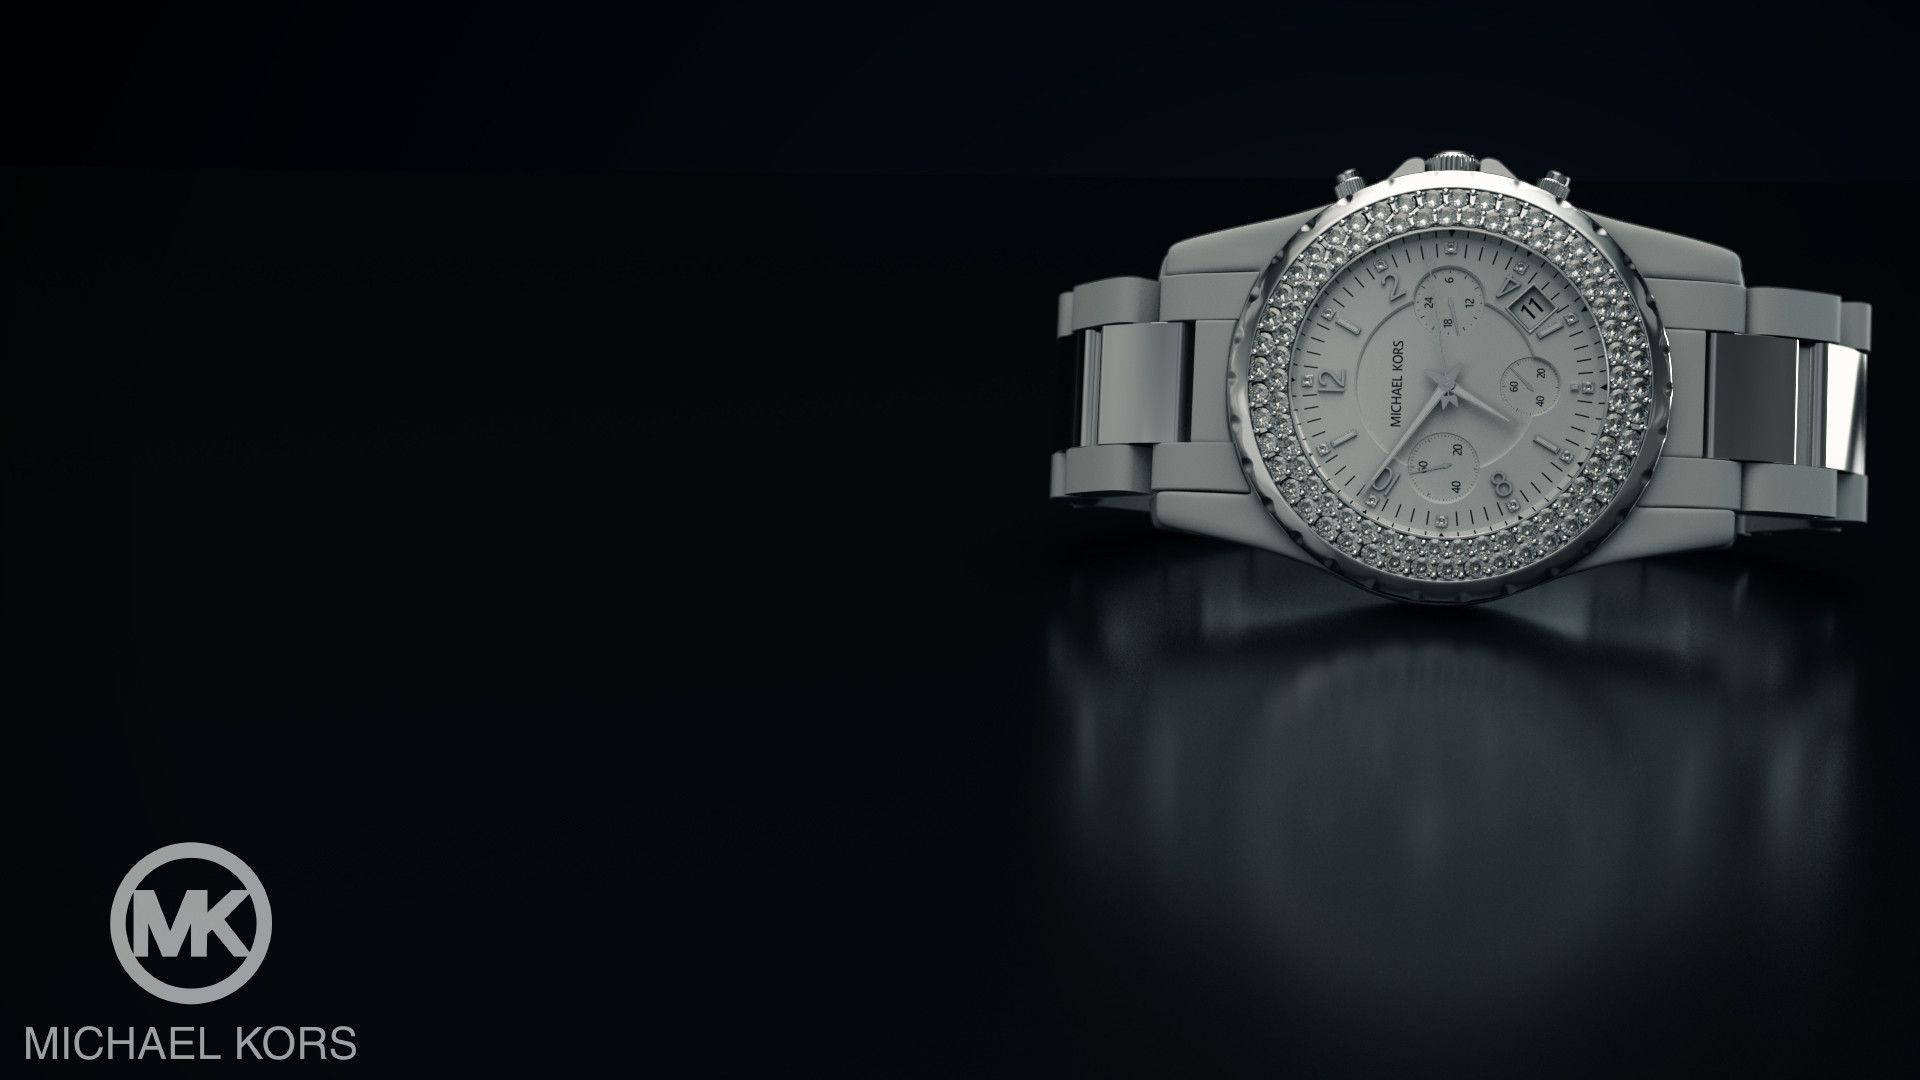 Michael Kors 1920X1080 Wallpaper and Background Image